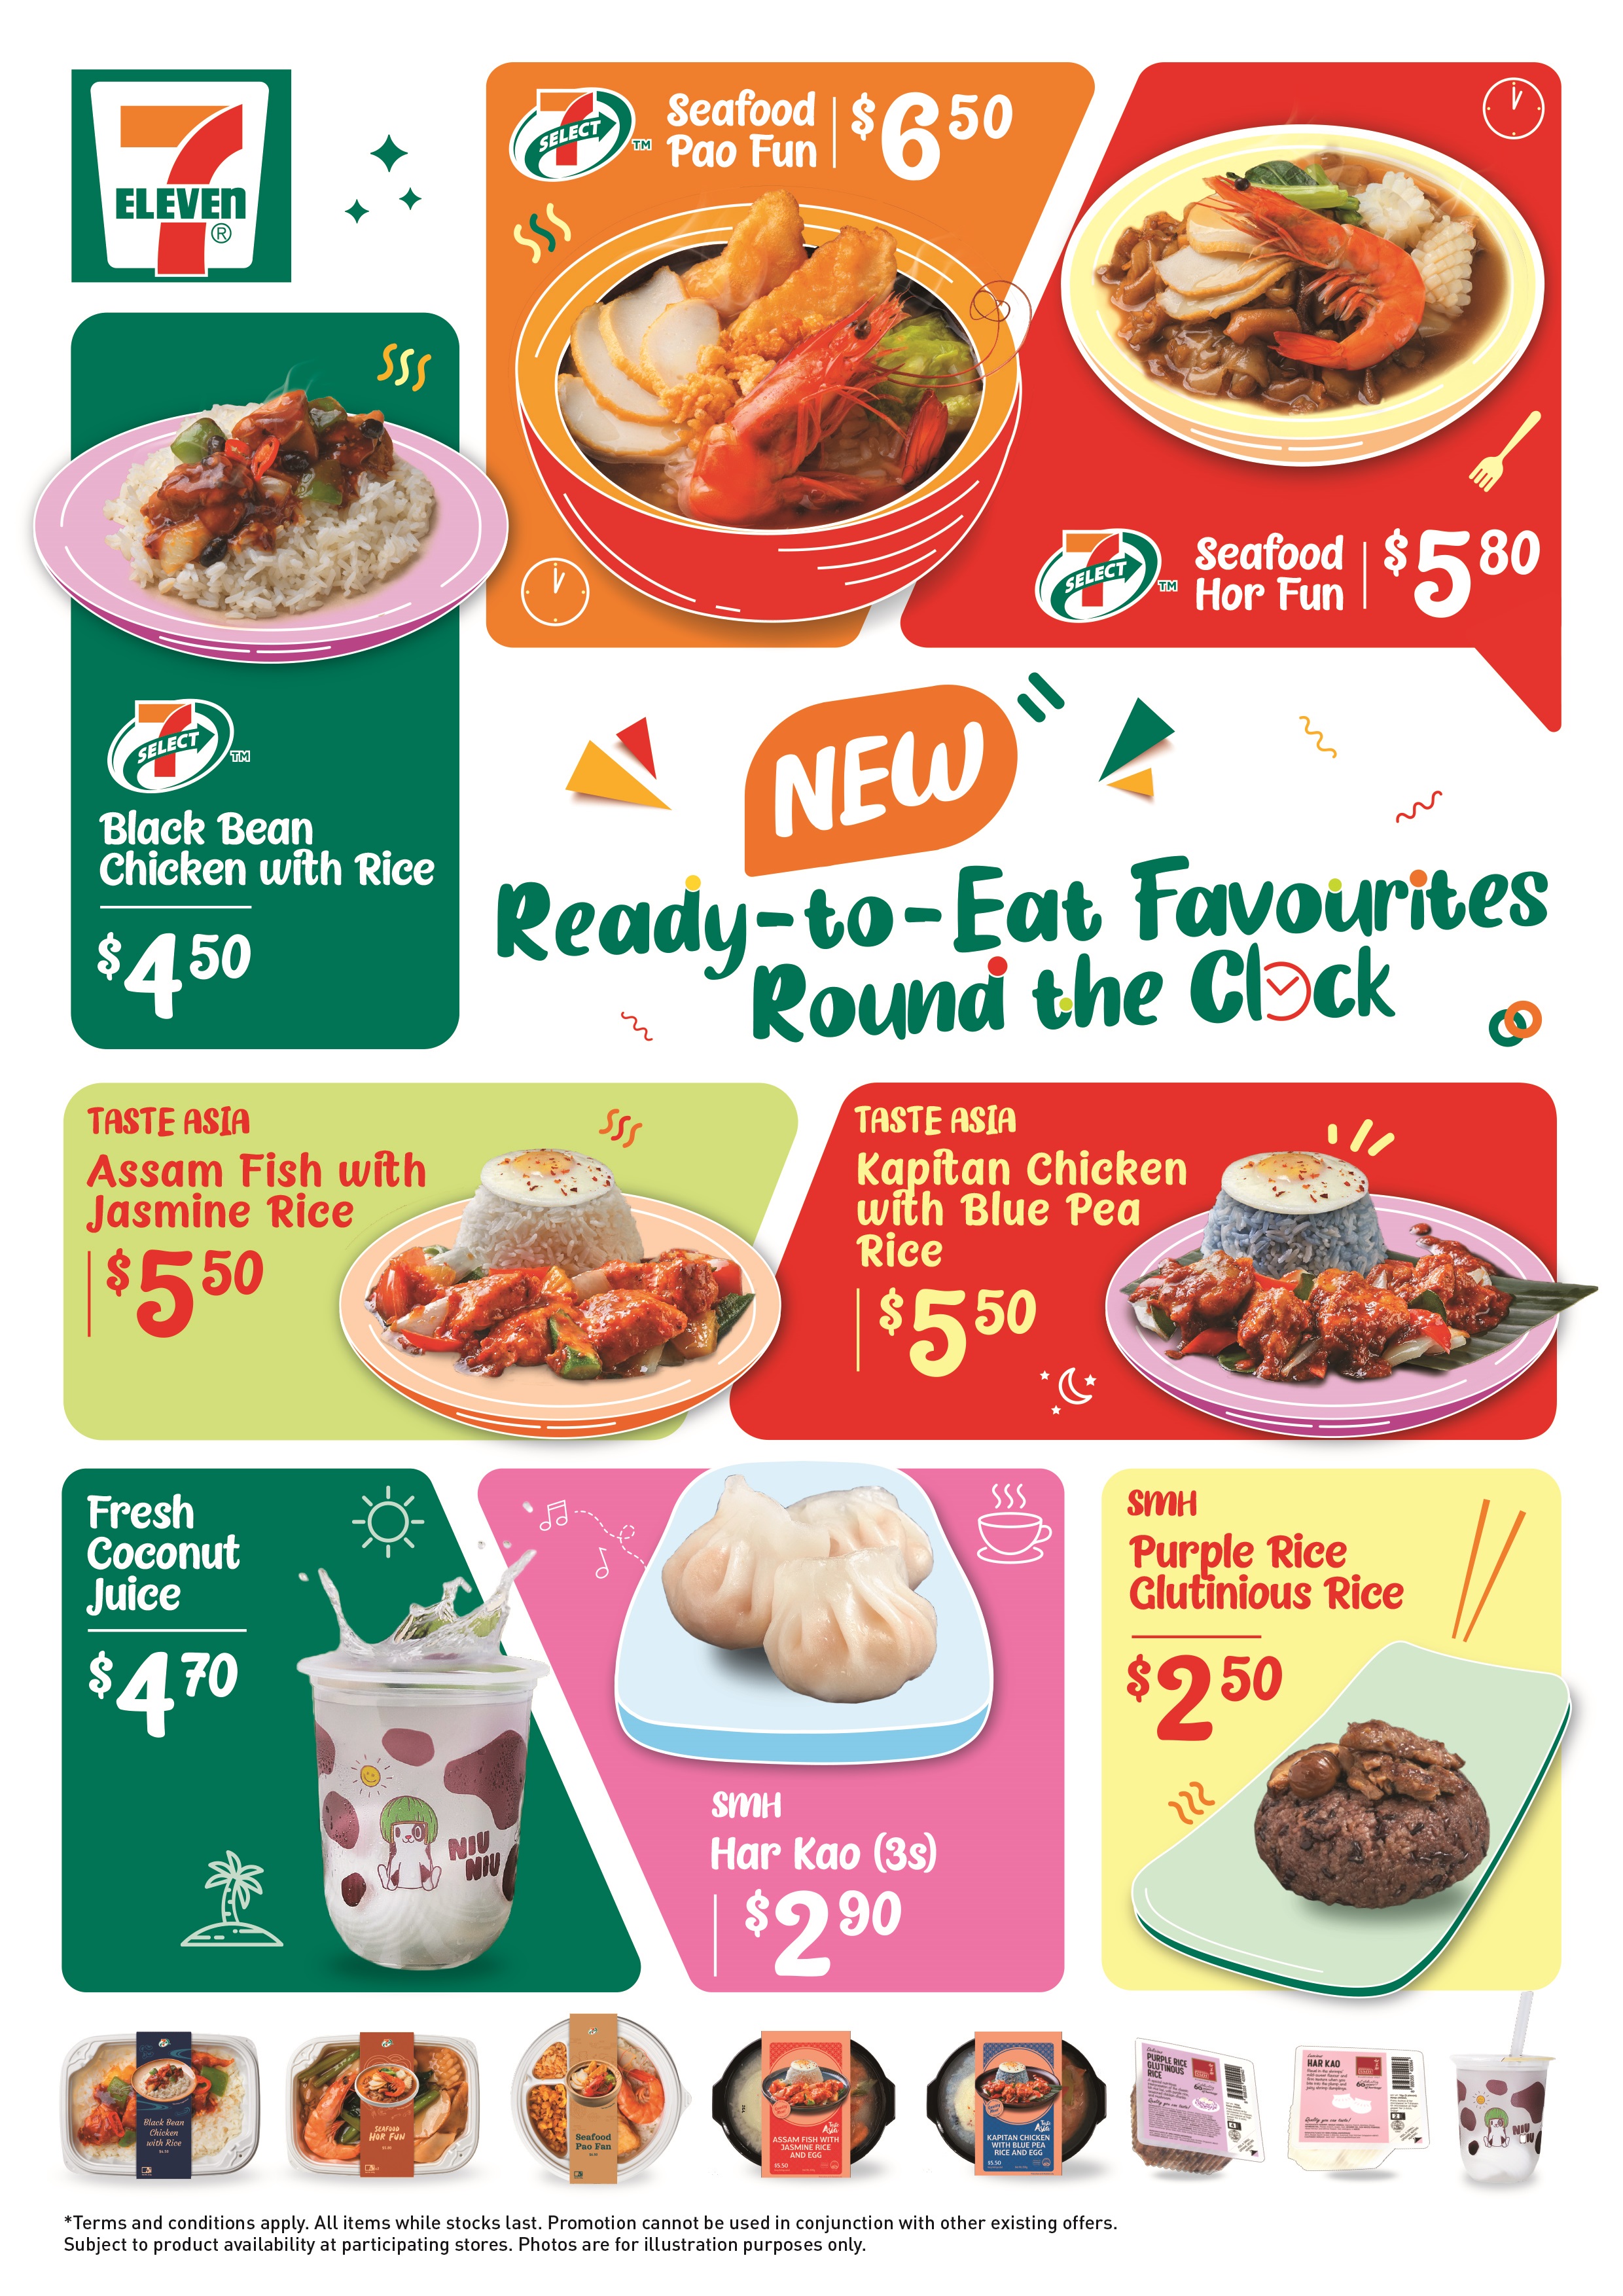 Recharge With 7-Eleven’s New Comfort Food Menu of Ready-to-Eat Local Delights